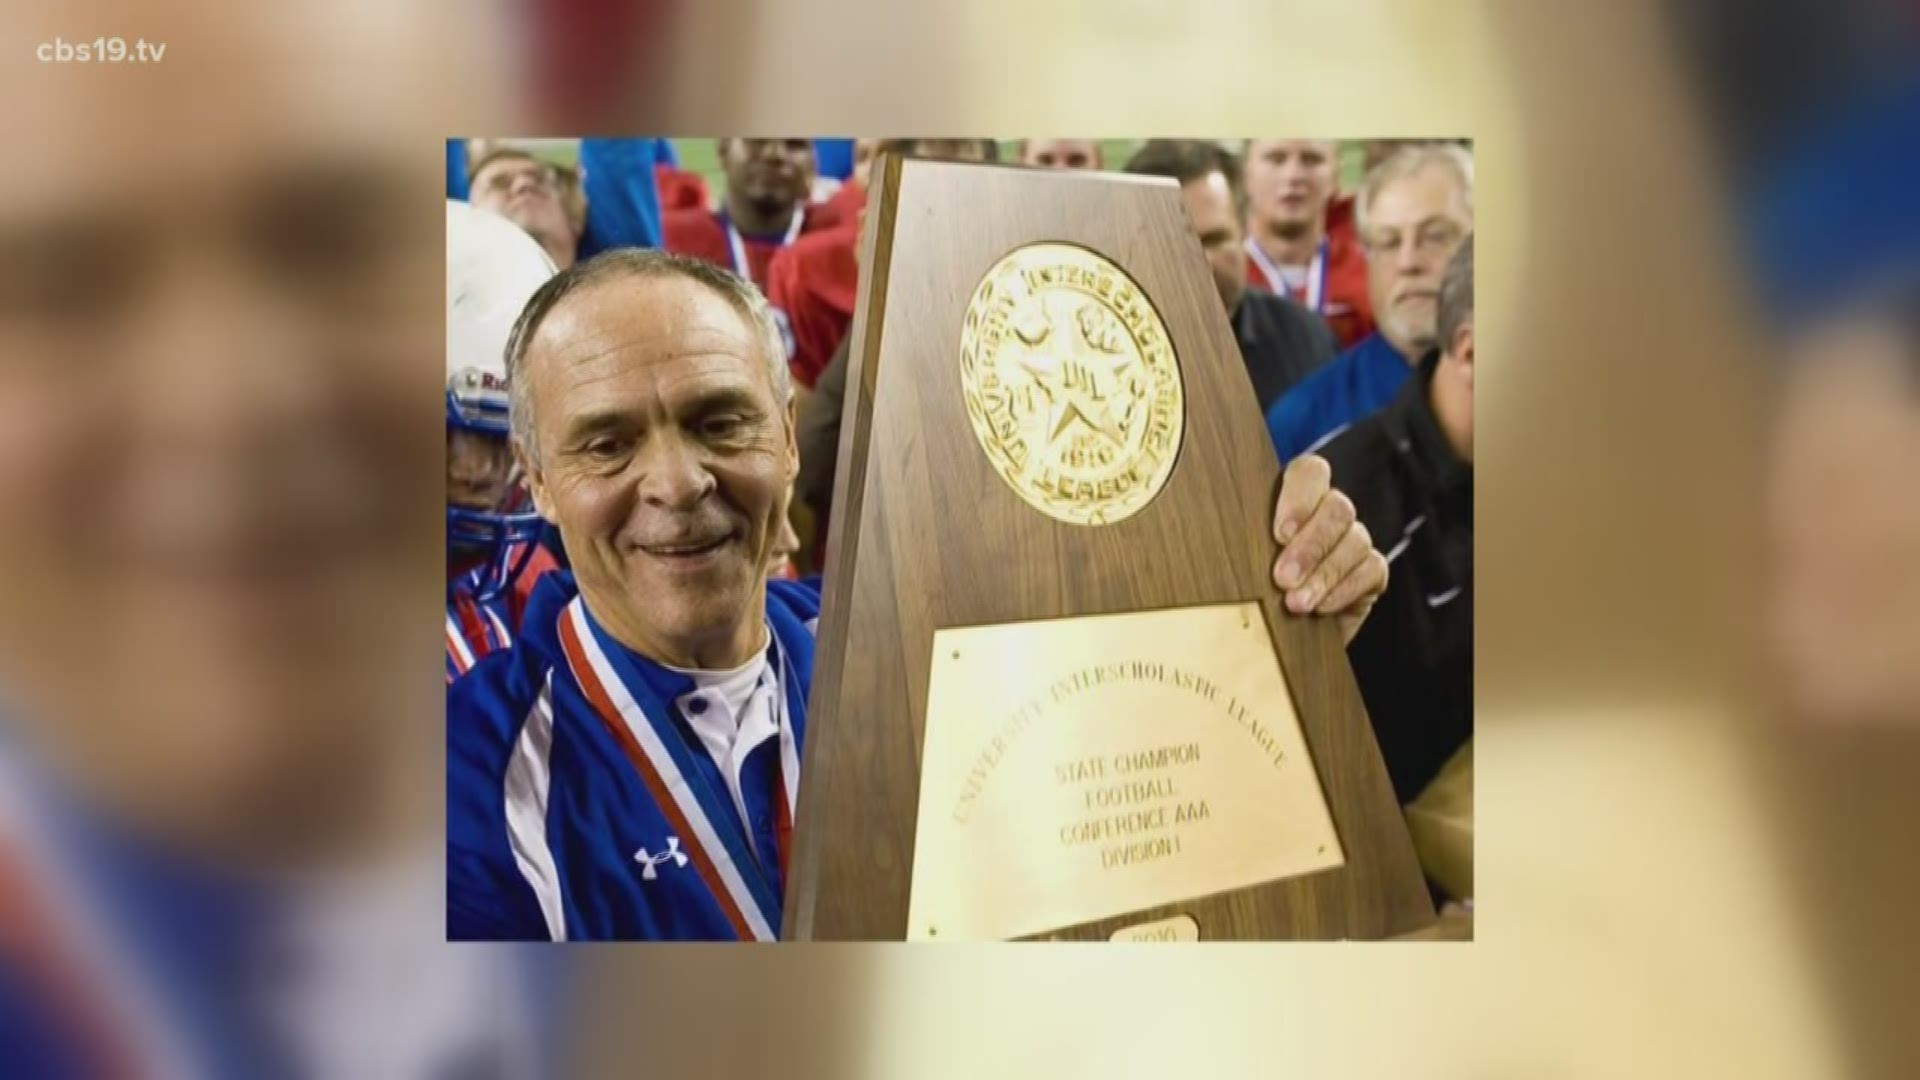 Coach Meeks passed away at the age of 66.